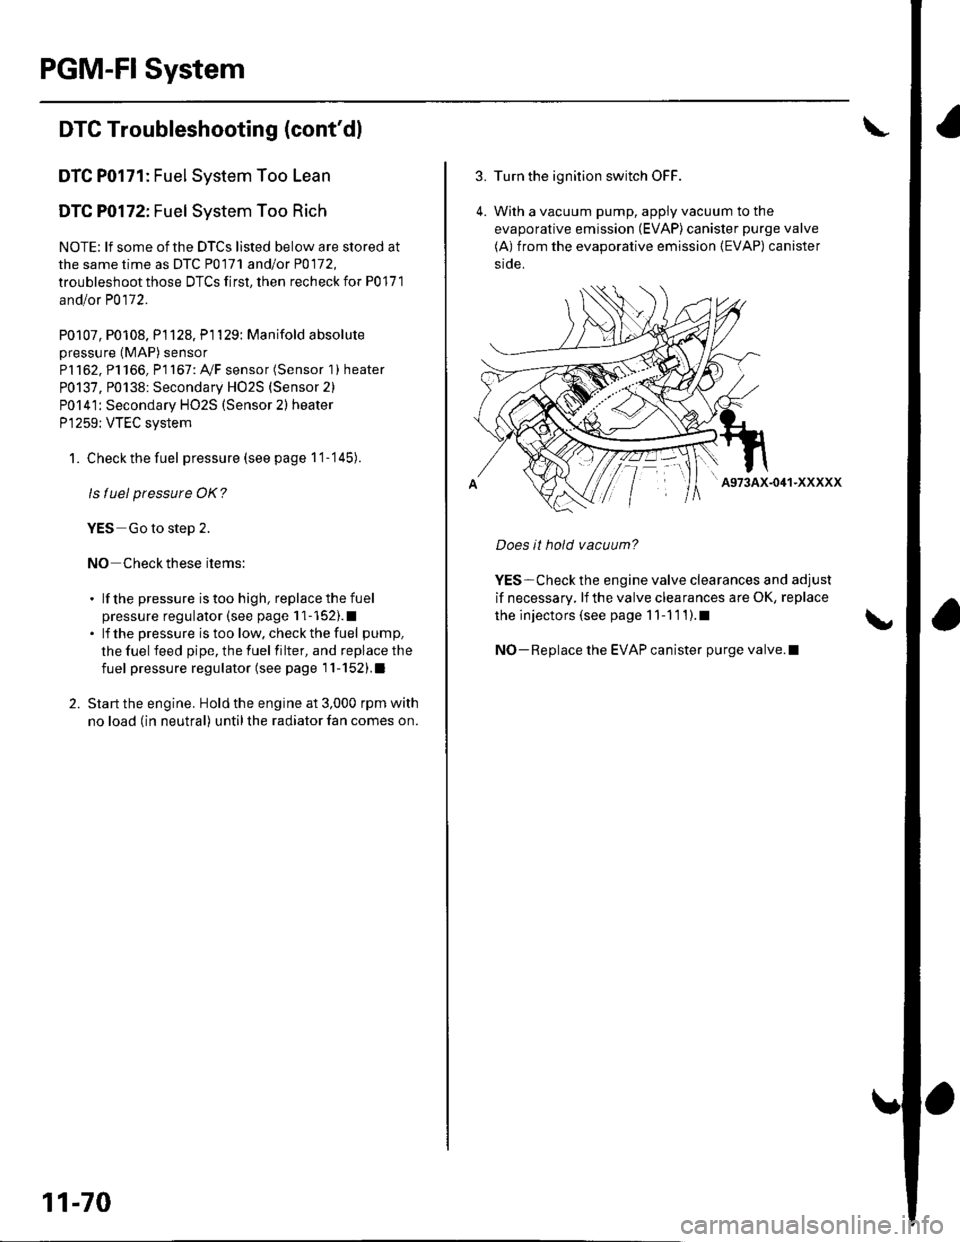 HONDA CIVIC 2003 7.G User Guide PGM-FI System
DTC Troubleshooting (contdl
DTC P0171: Fuel System Too Lean
DTC P0172: Fuel System Too Rich
NOTE: lf some of the DTCS listed below are stored at
the same time as DfC PO17l and/ot PO172